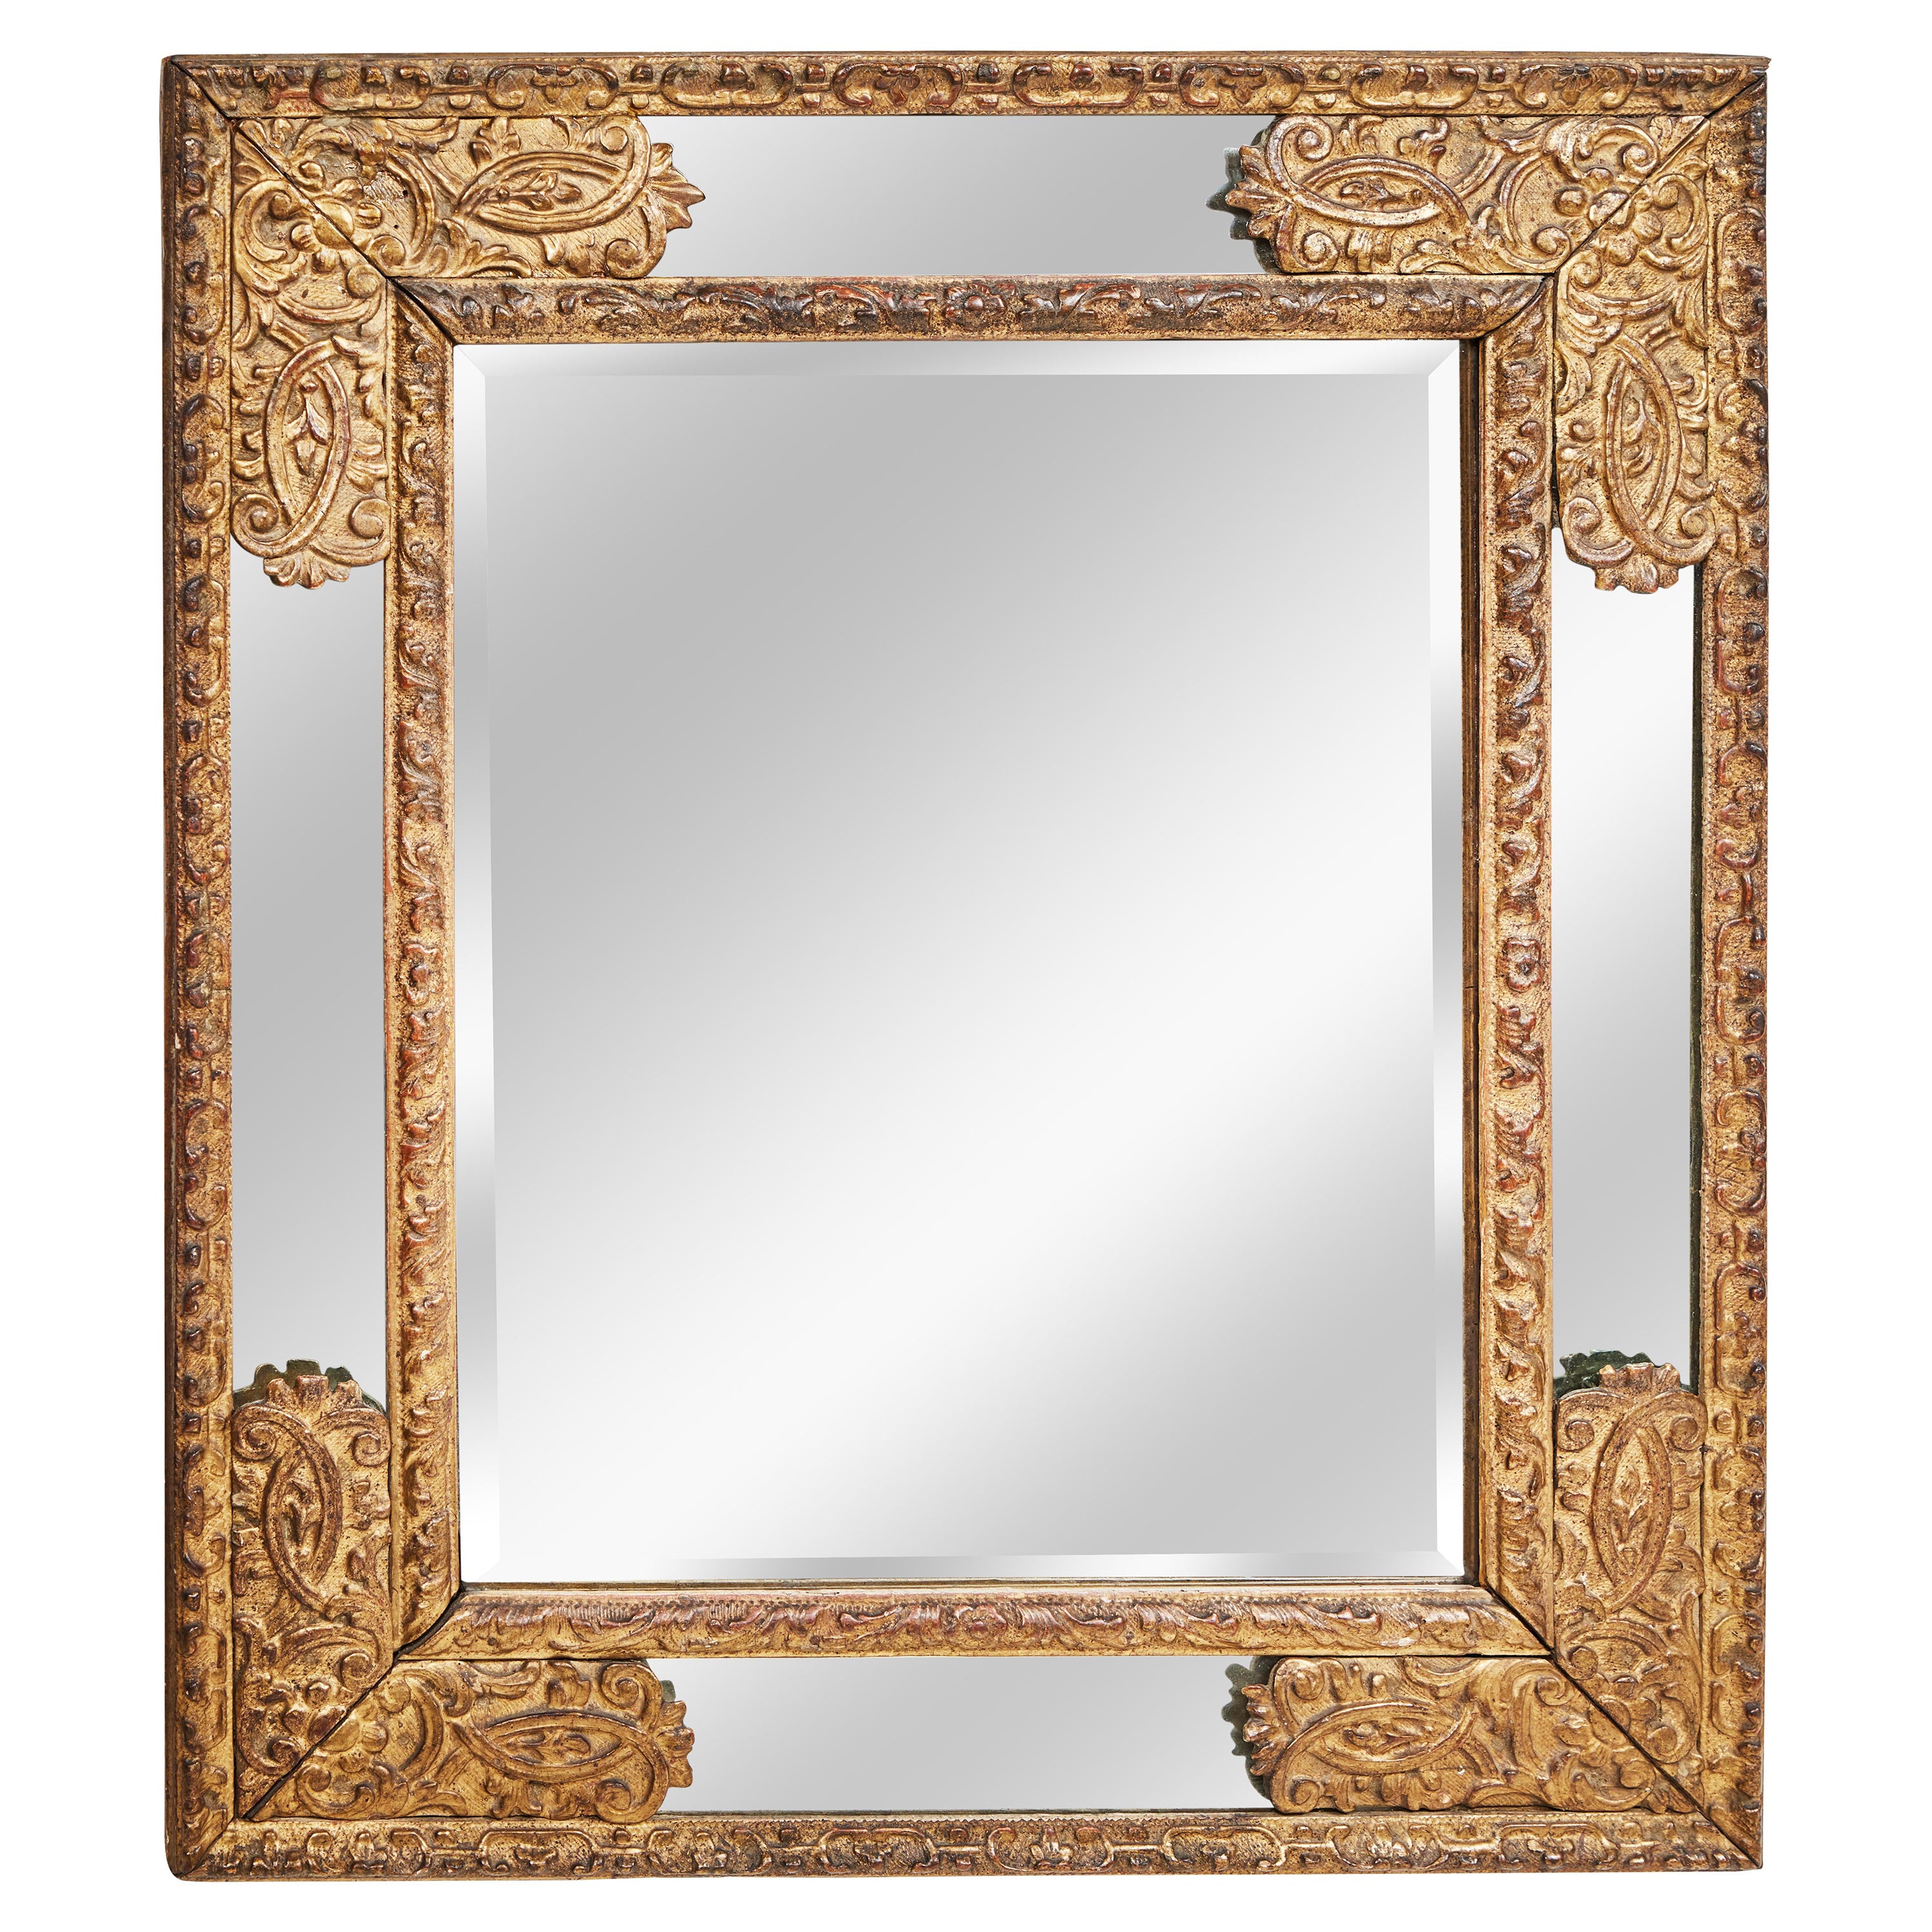 Régence Period Mirror For Sale